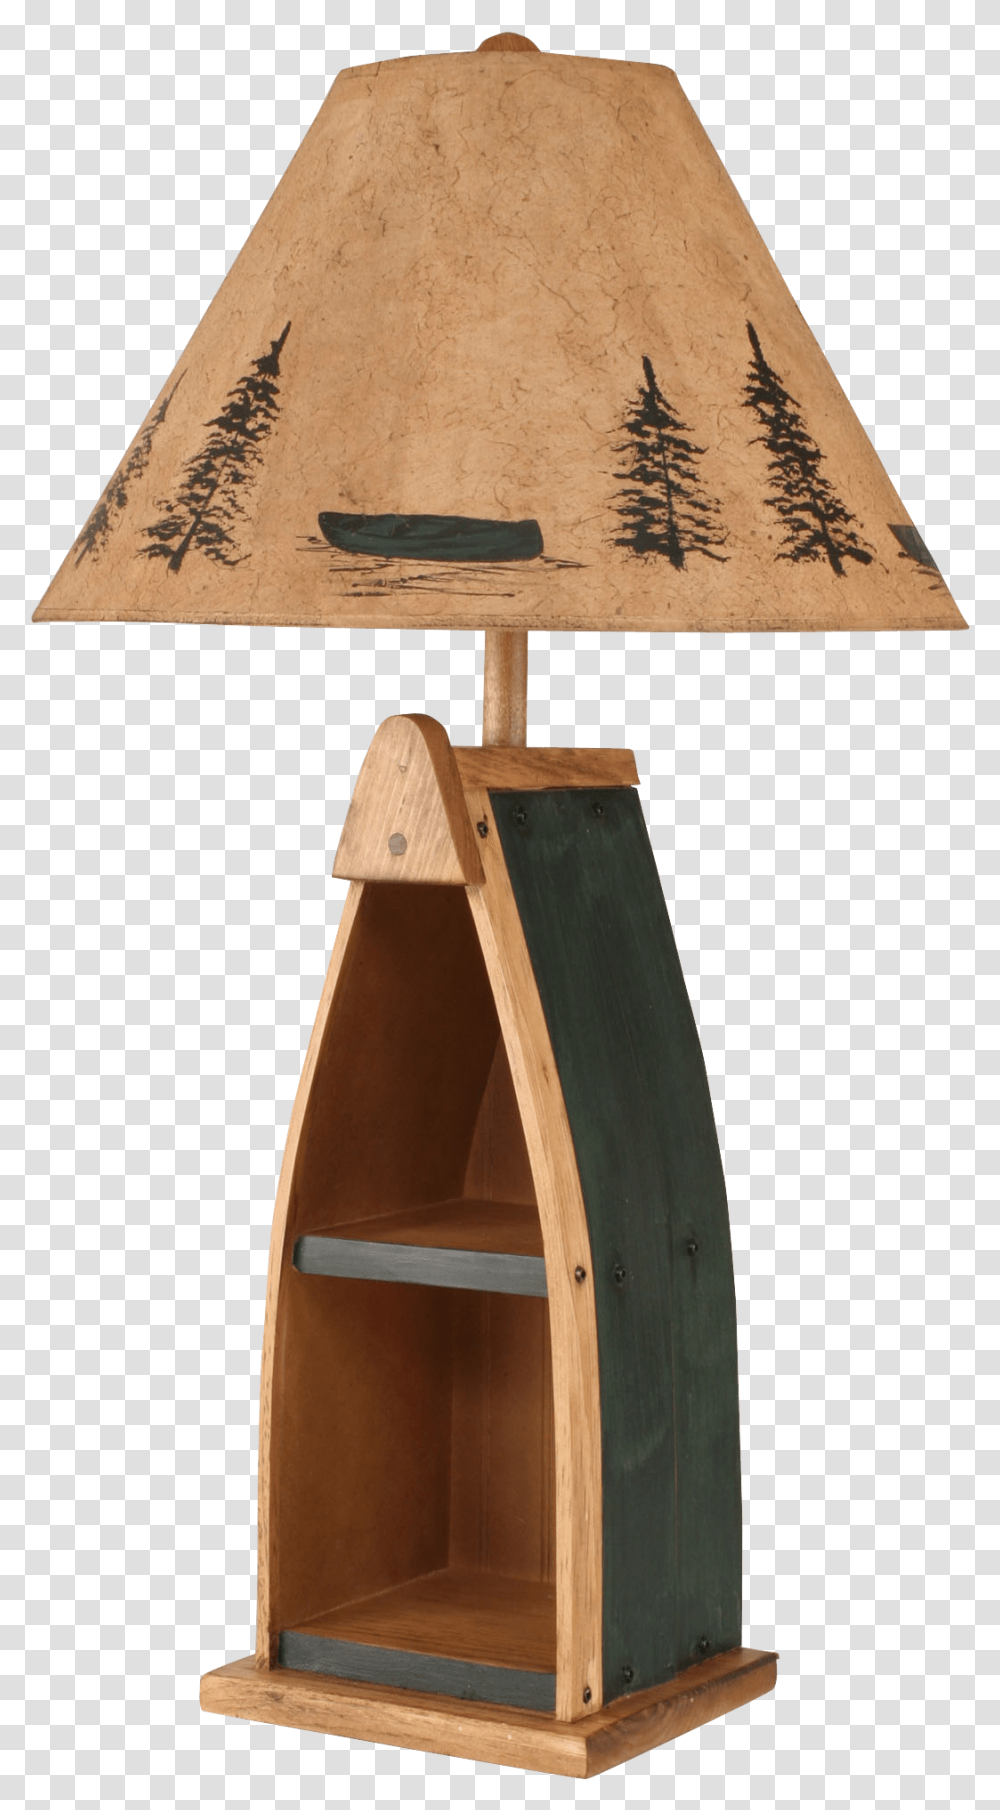 Green Wooden Boat Boat Lamps, Table Lamp, Lampshade, Plywood, Cross Transparent Png